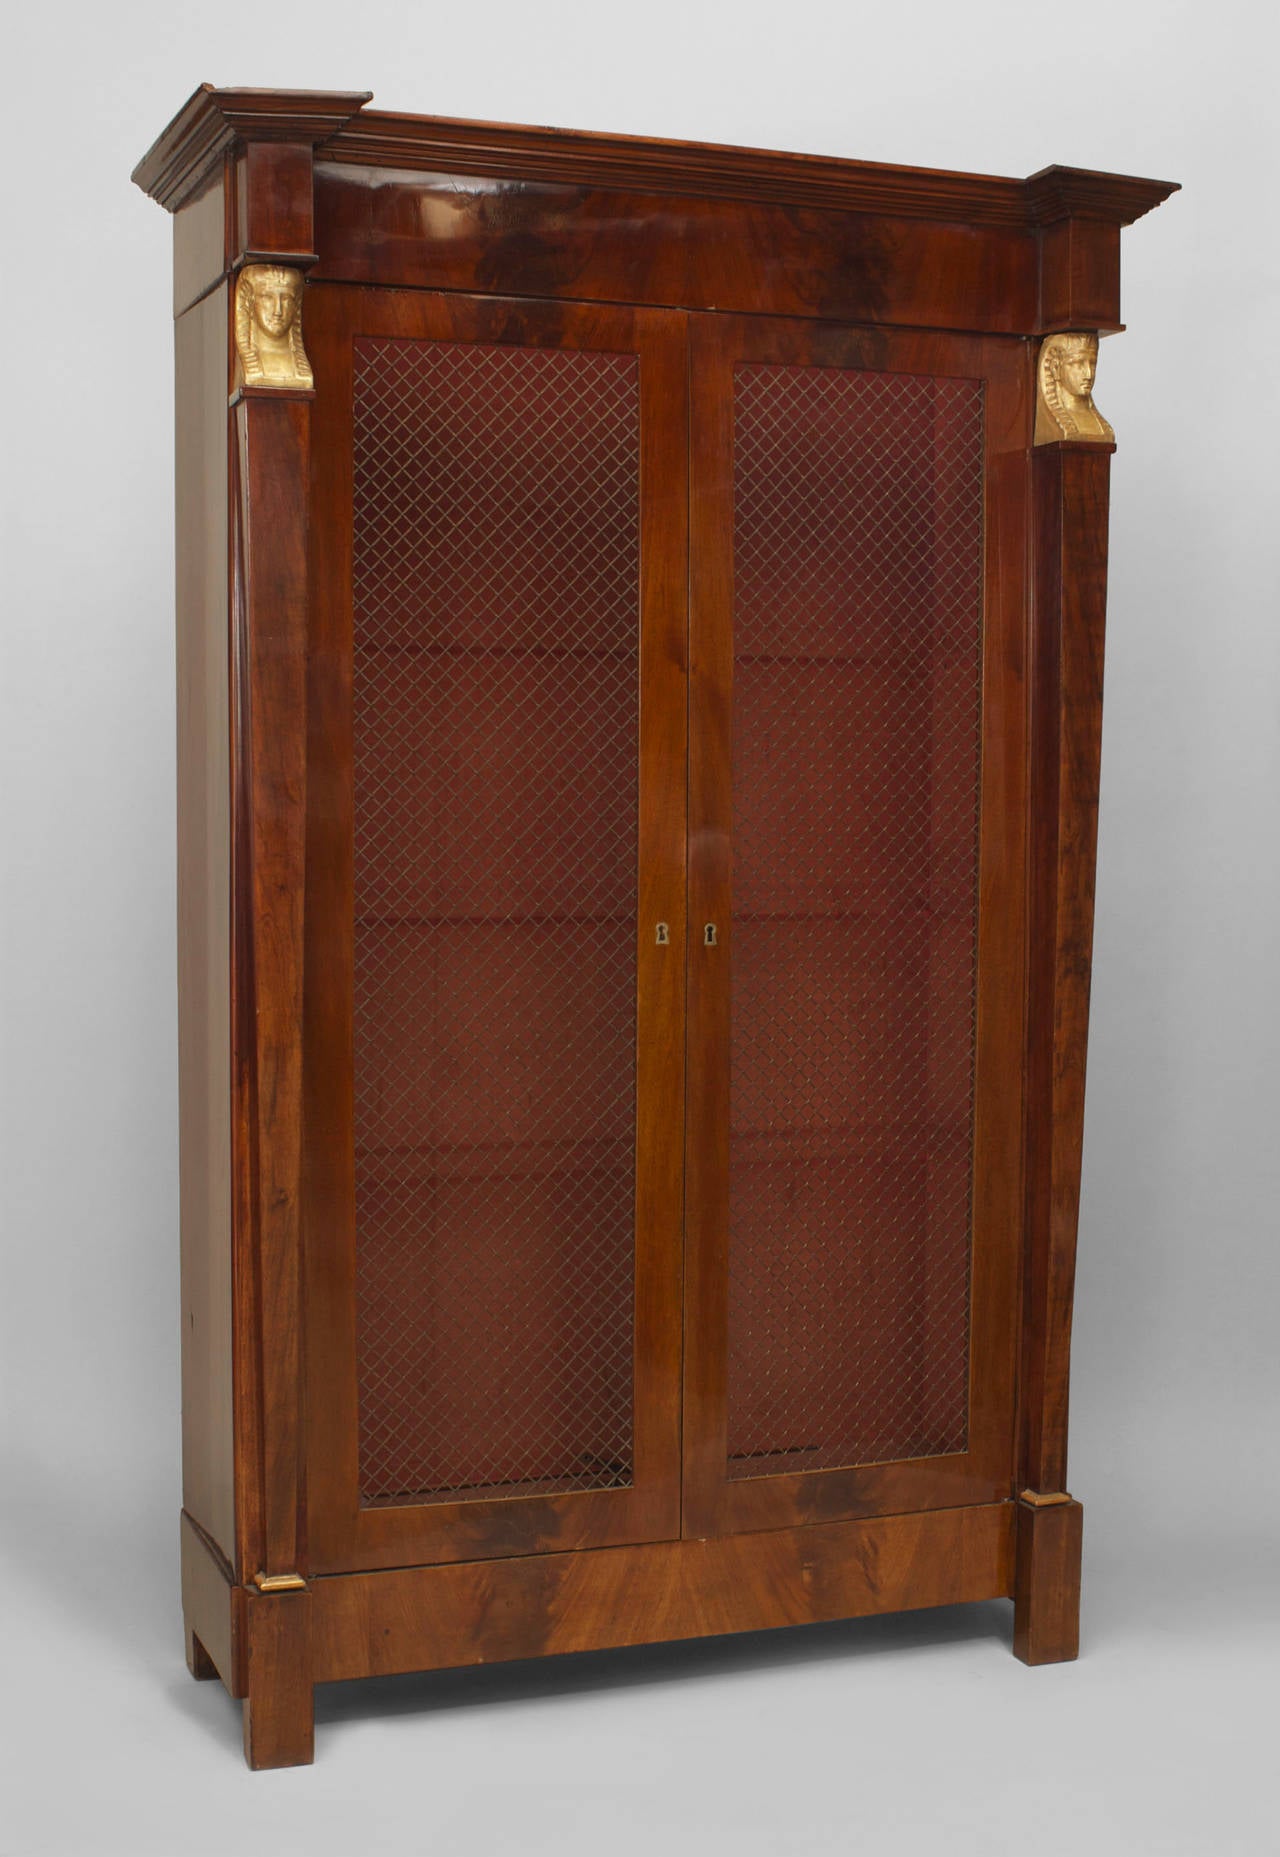 French Empire flame mahogany 2 door biblioth√®que cabinet with with wire mesh and tapered square column sides having gilt bronze trim with classical heads.
